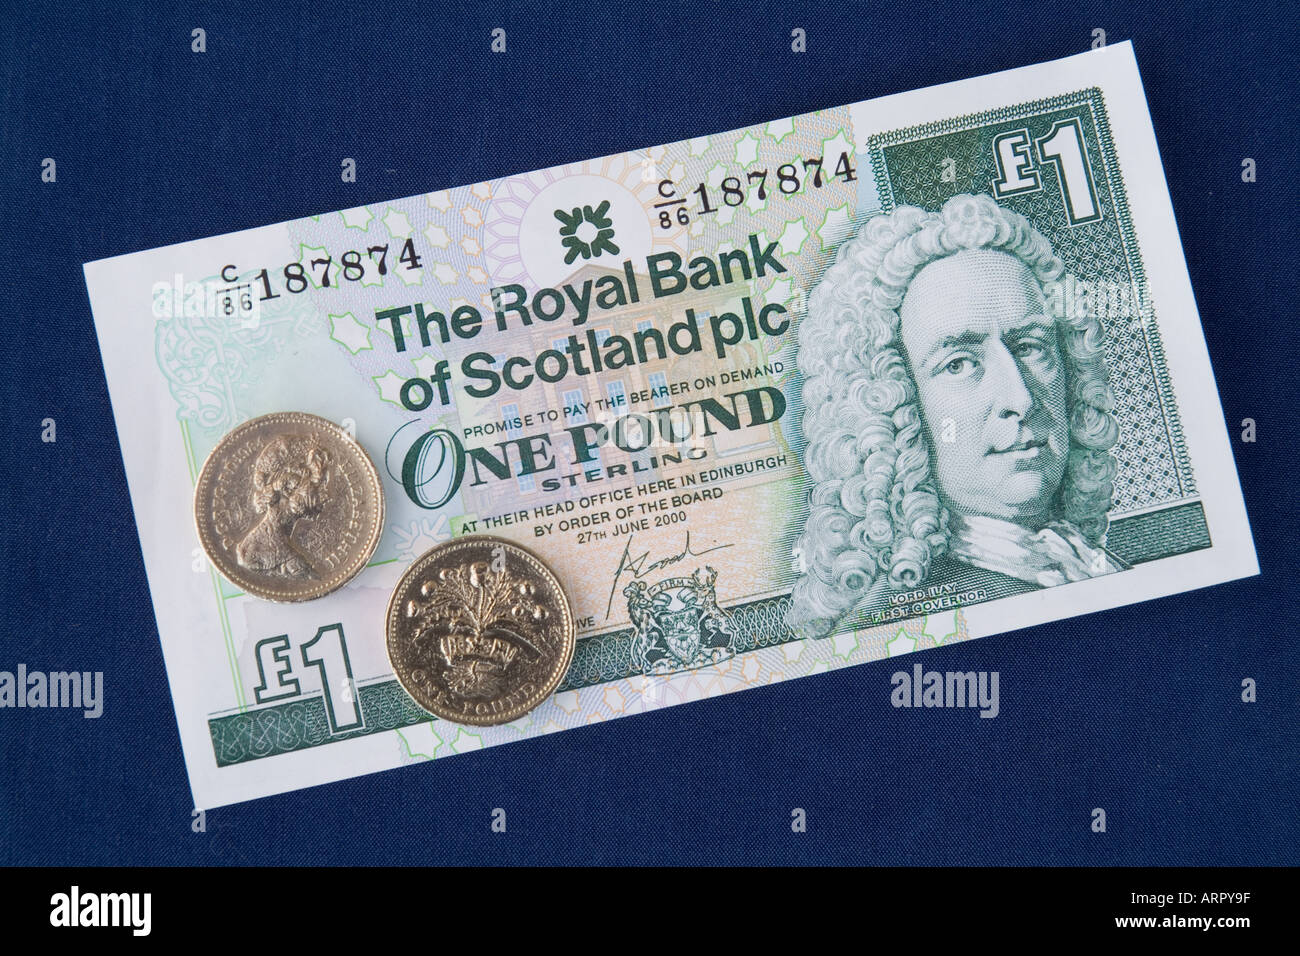 dh Royal Bank of Scotland MONEY SCOTLAND UK scottish one pound note sterling coins banknotes cash coin banknote notes currency Stock Photo